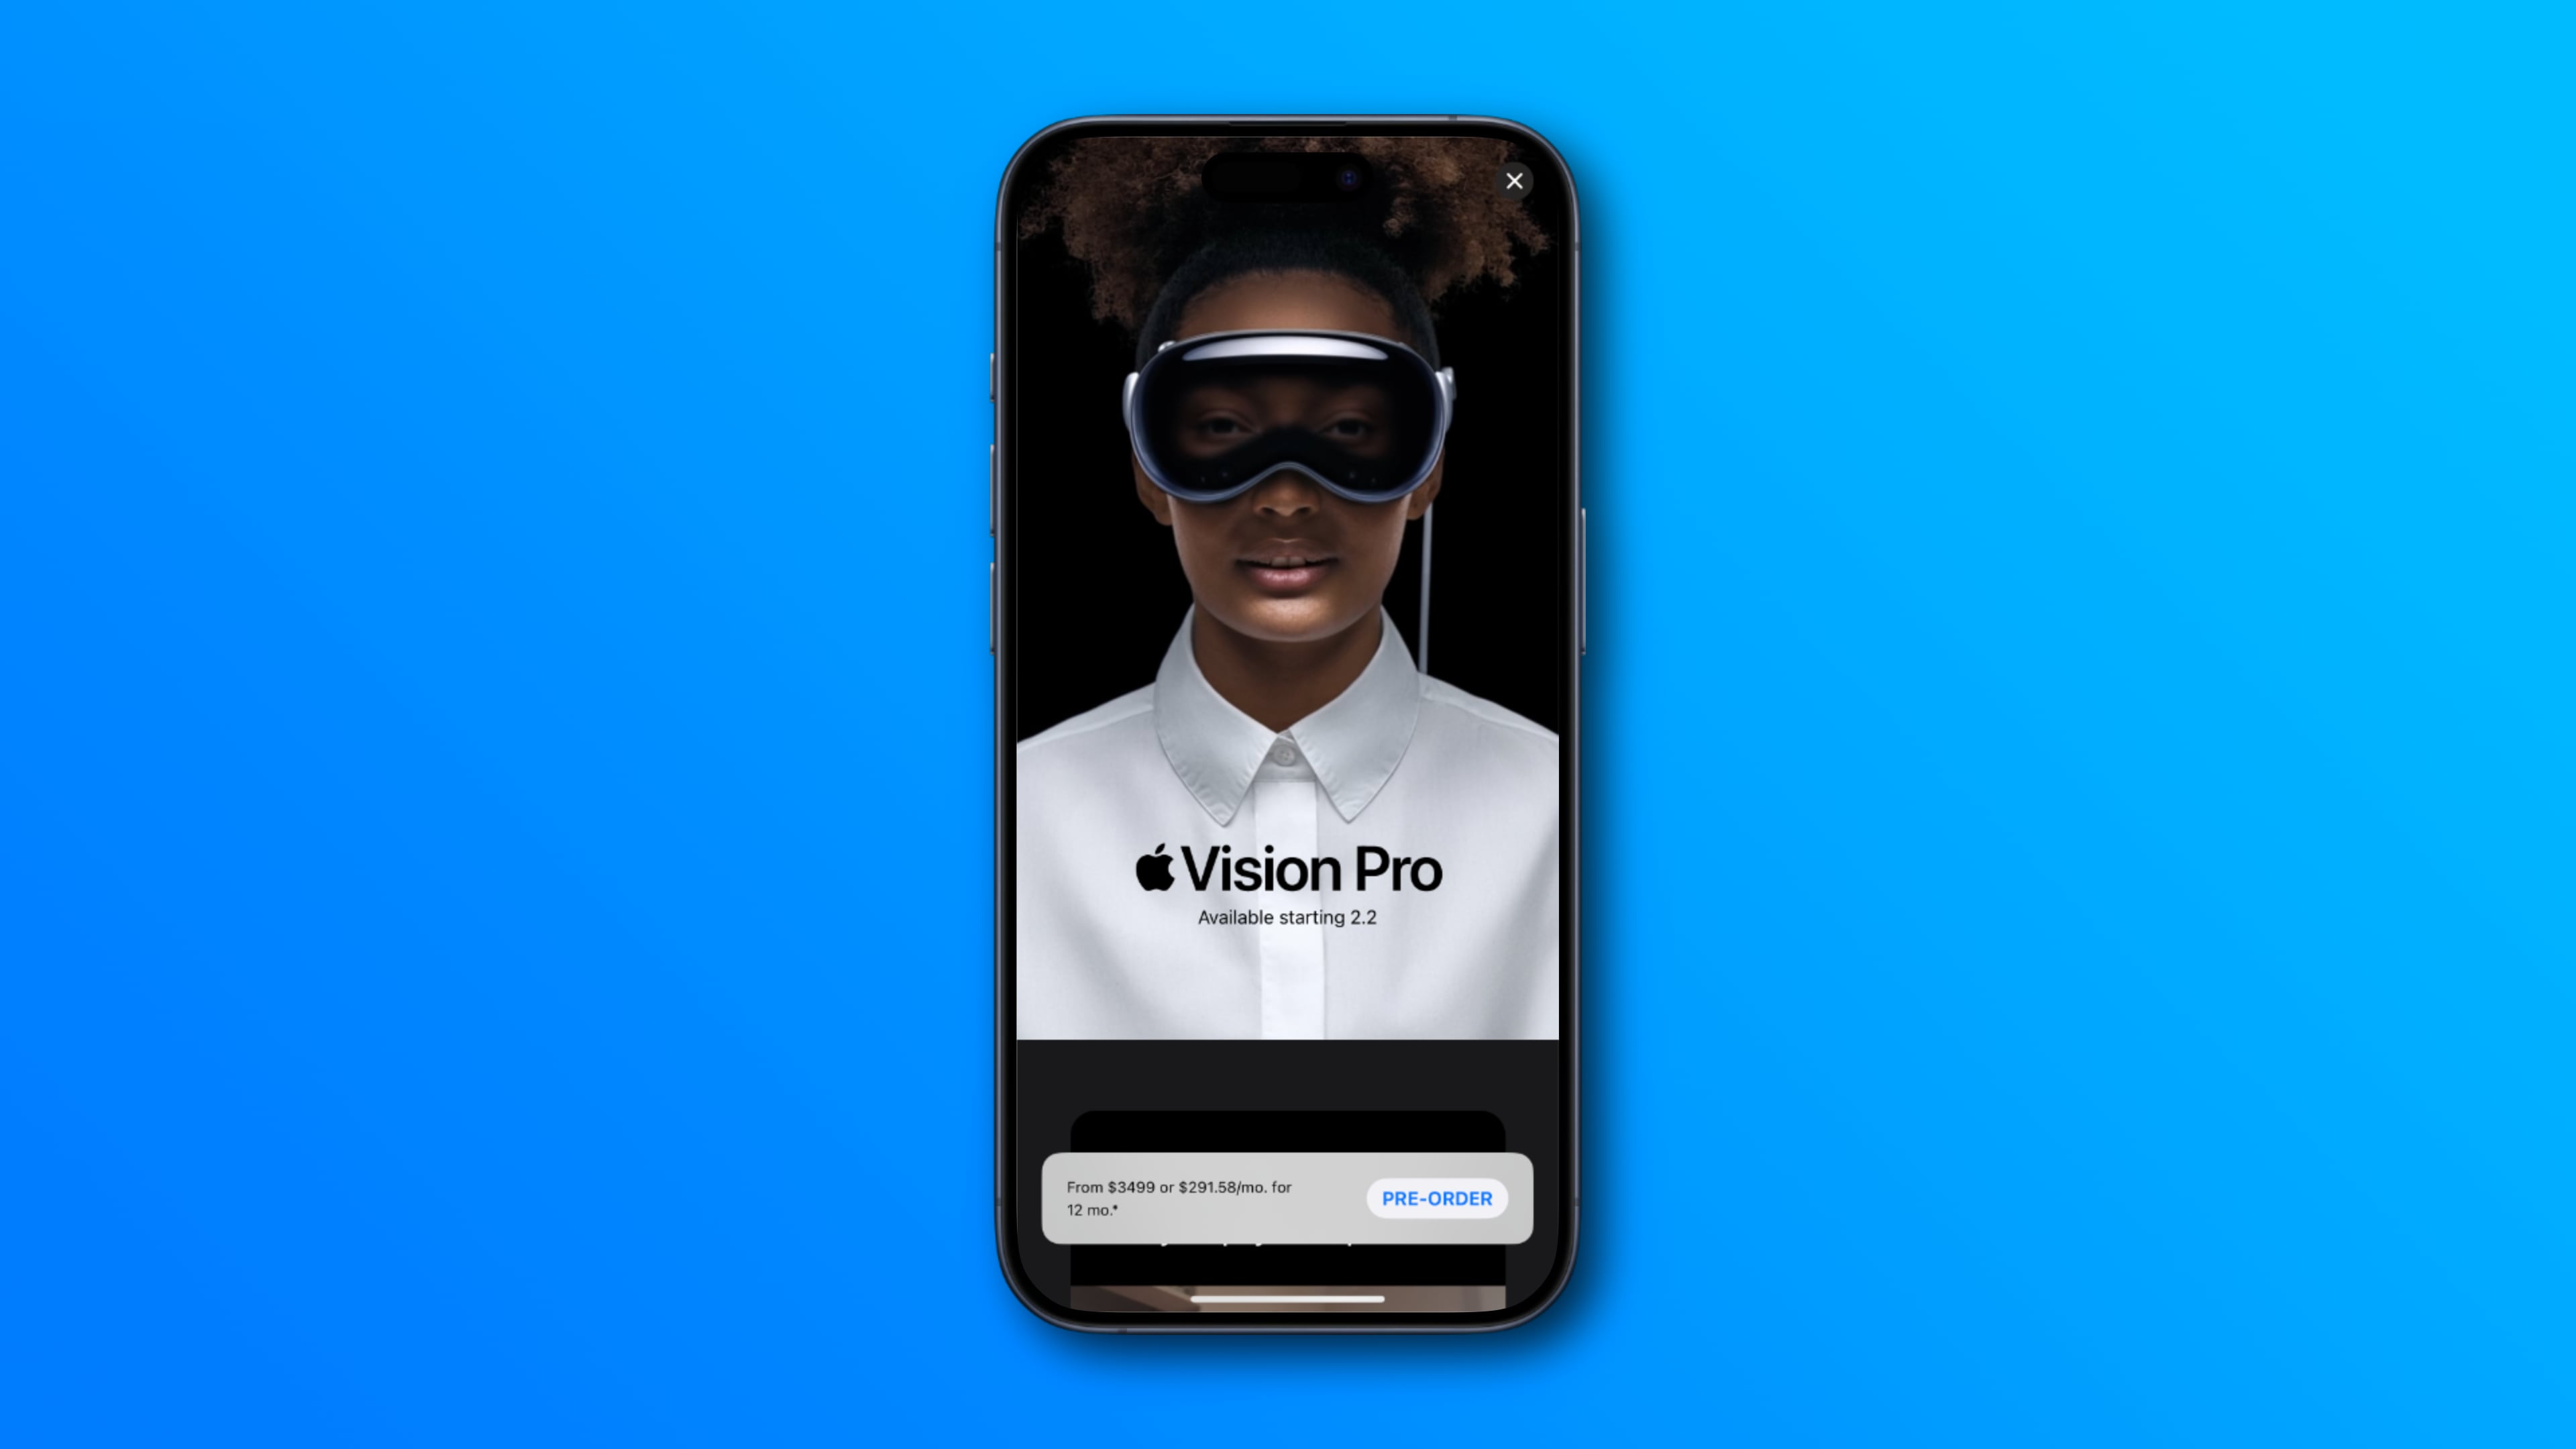 Apple Vision Pro in the iPhone's Apple Store app